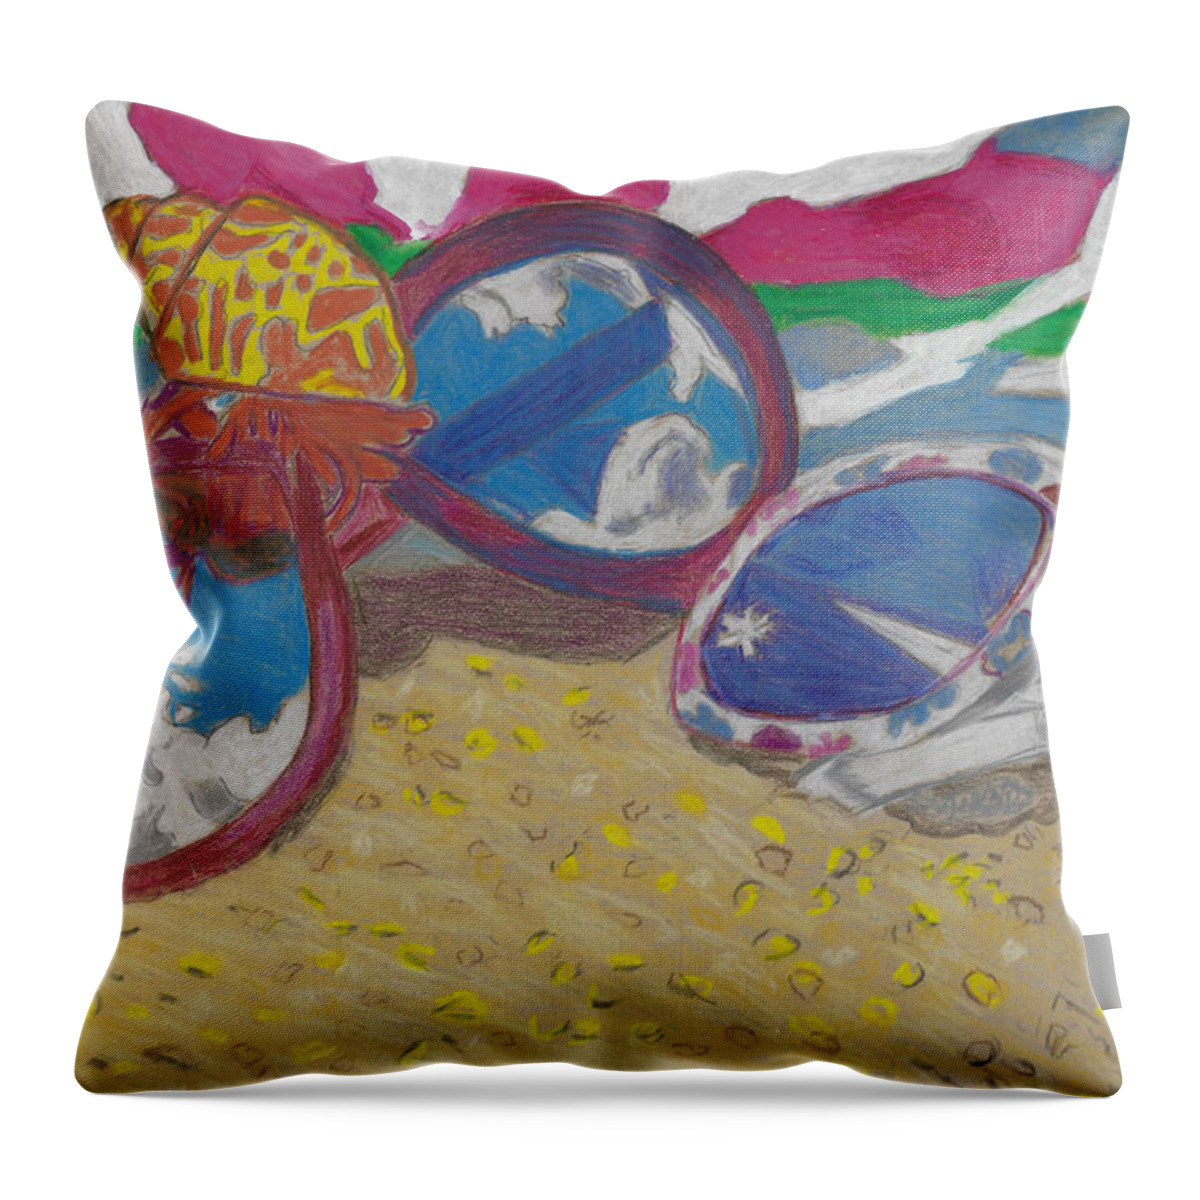 Beach Throw Pillow featuring the drawing At the Beach Sunglasses Lying on the Sand with a Hermit Crab and Beach Towel by Ali Baucom